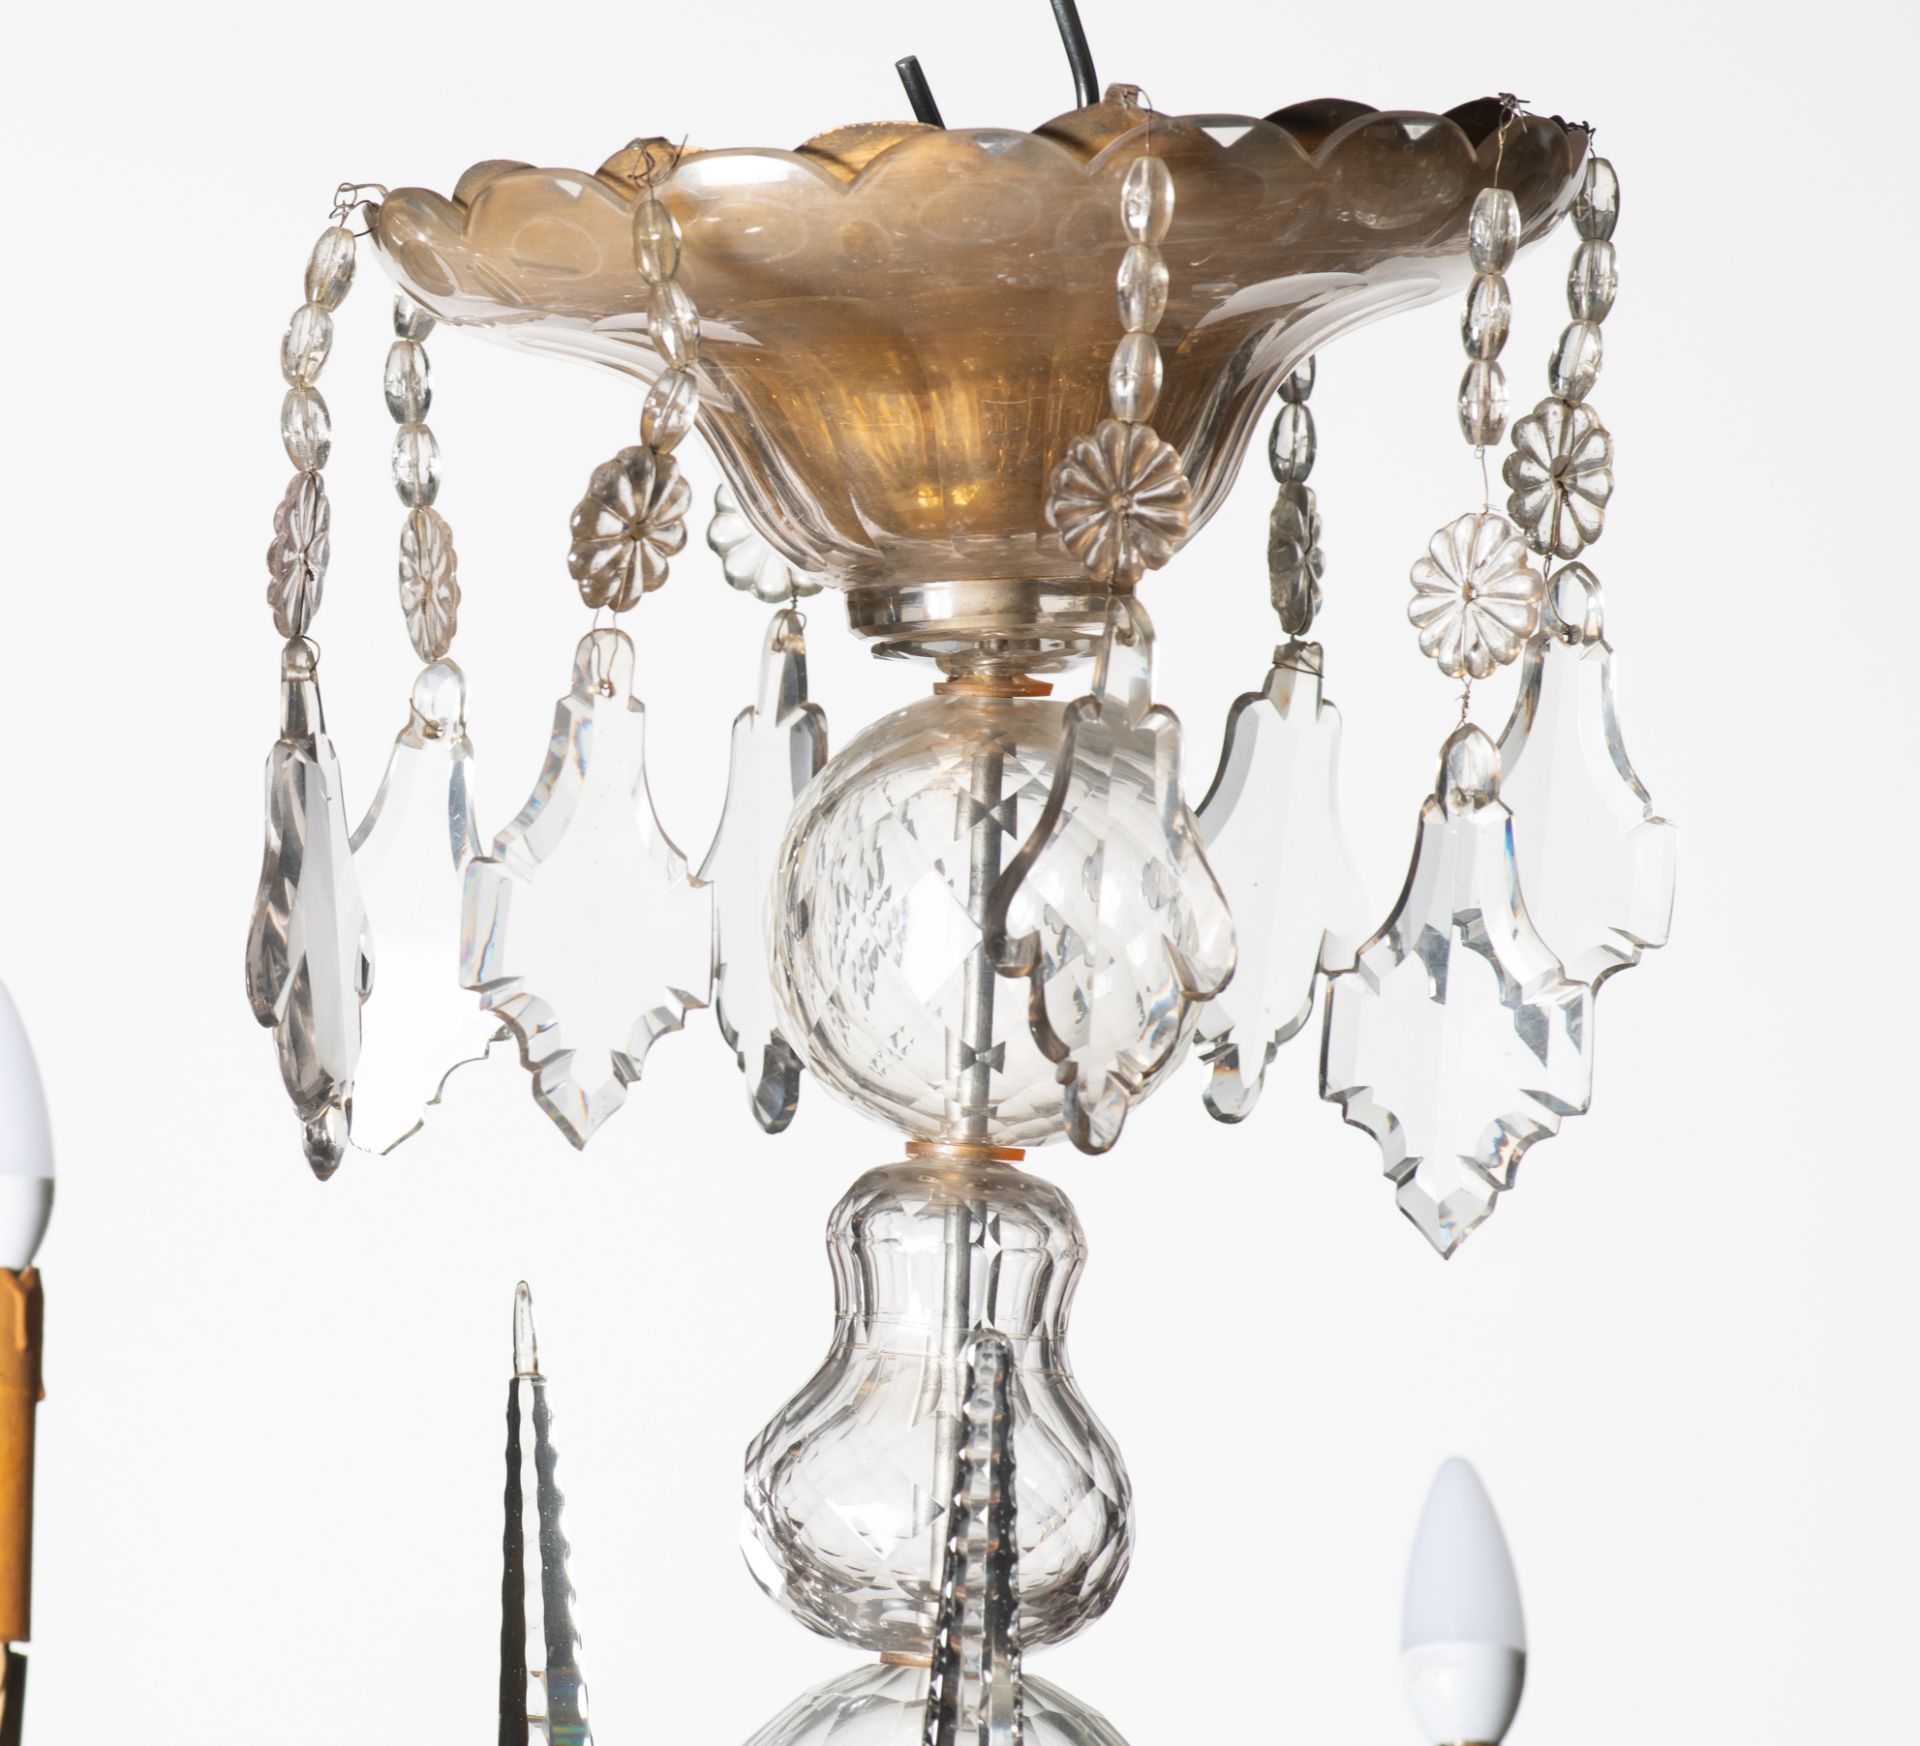 An imposing six-armed Venetian type glass chandelier, H 80 - › 107 cm, - Image 4 of 6